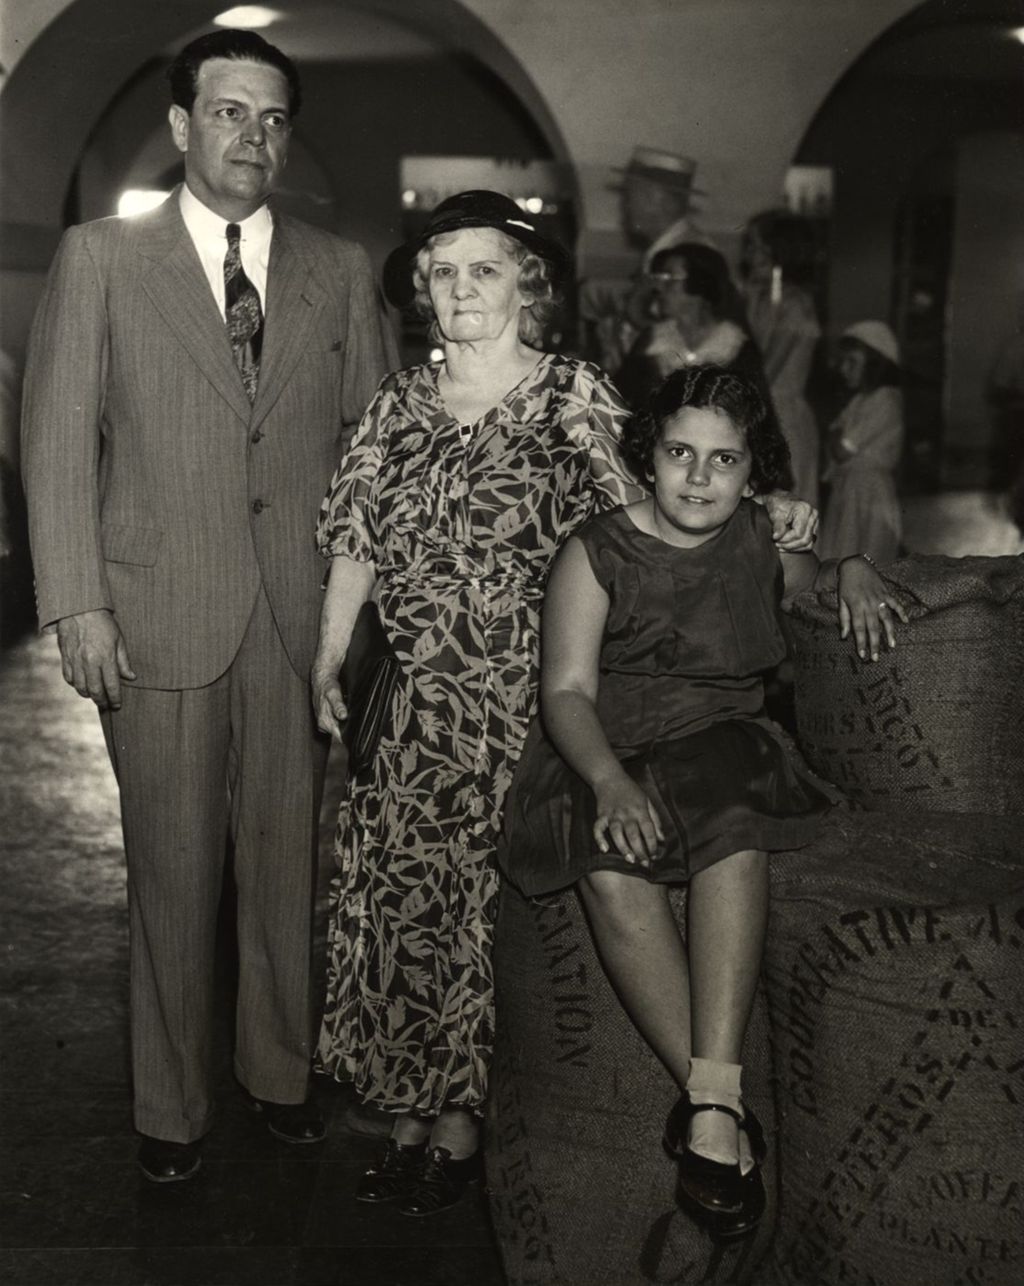 Photograph shows three generations of Cubans during a neighborly visit to the Puerto Rican exhibit